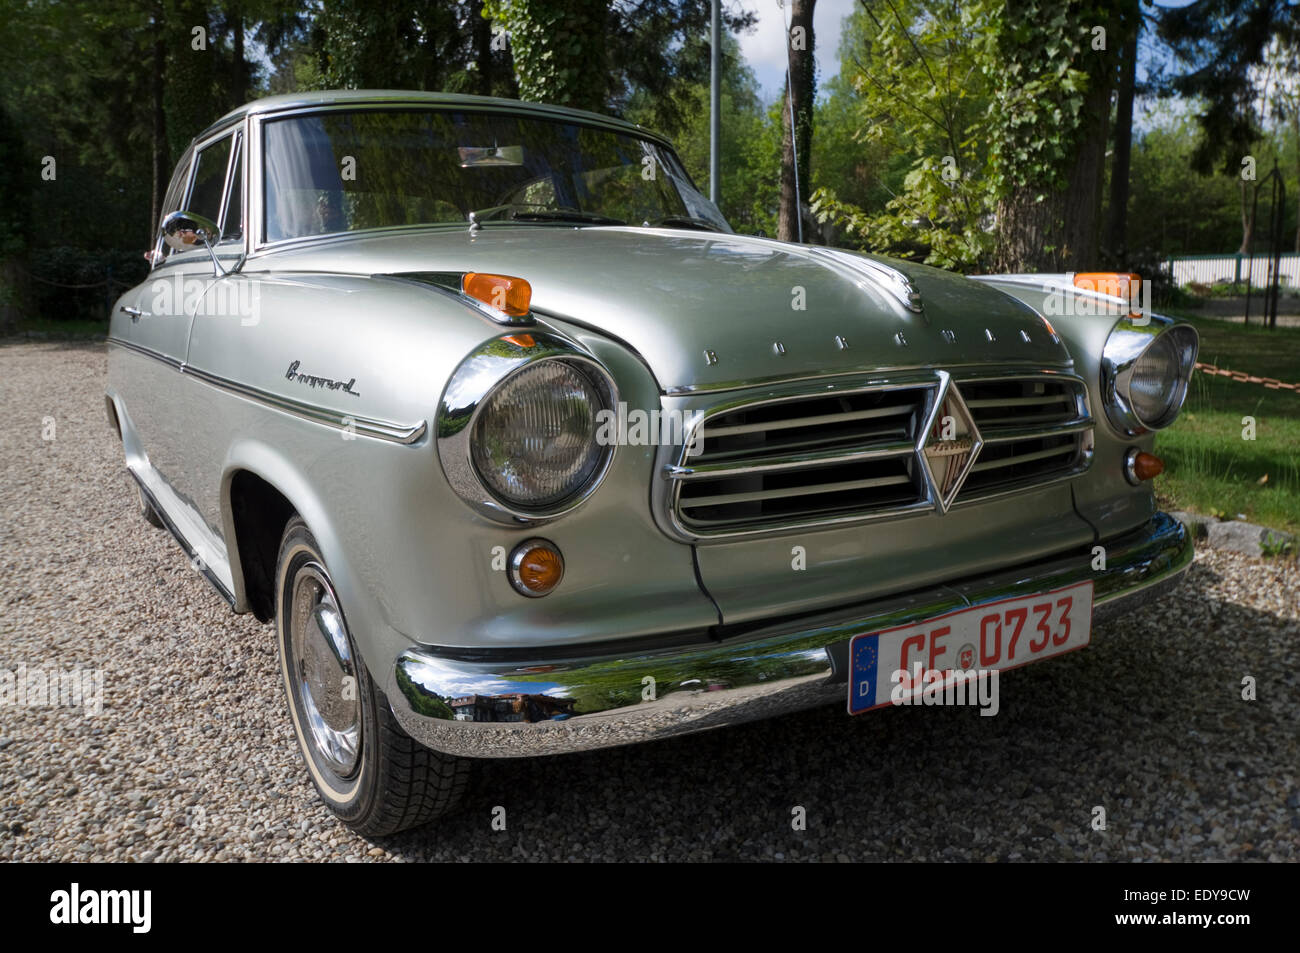 Borgward Isabella classic car in pristine shape parking in front of the Isarhatsche Estate in Bispingen, Northern Germany Stock Photo